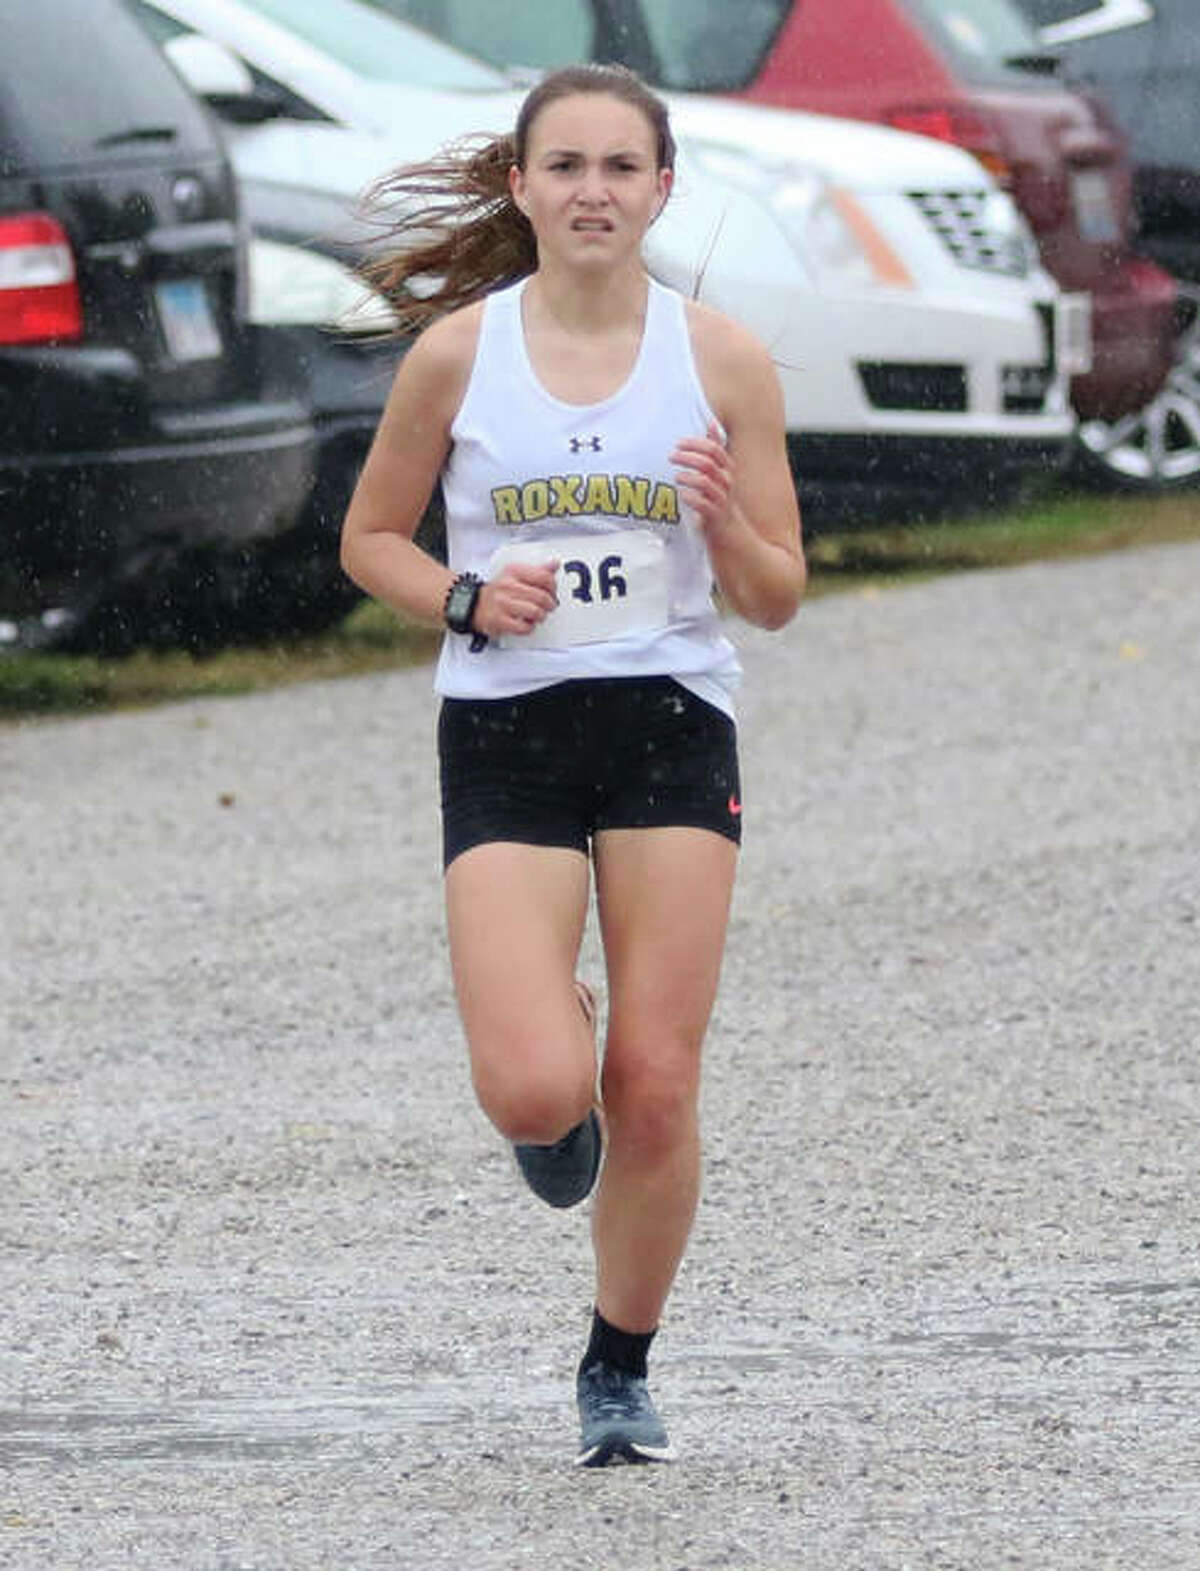 Roxana senior Keiko Palen runs in the rain during last season’s New Athens Class 1A Regional. Palen, who ran fifth in the regional, and classmate Janelynn Wirth return to lead what project as a big season for Shells girls cross country.